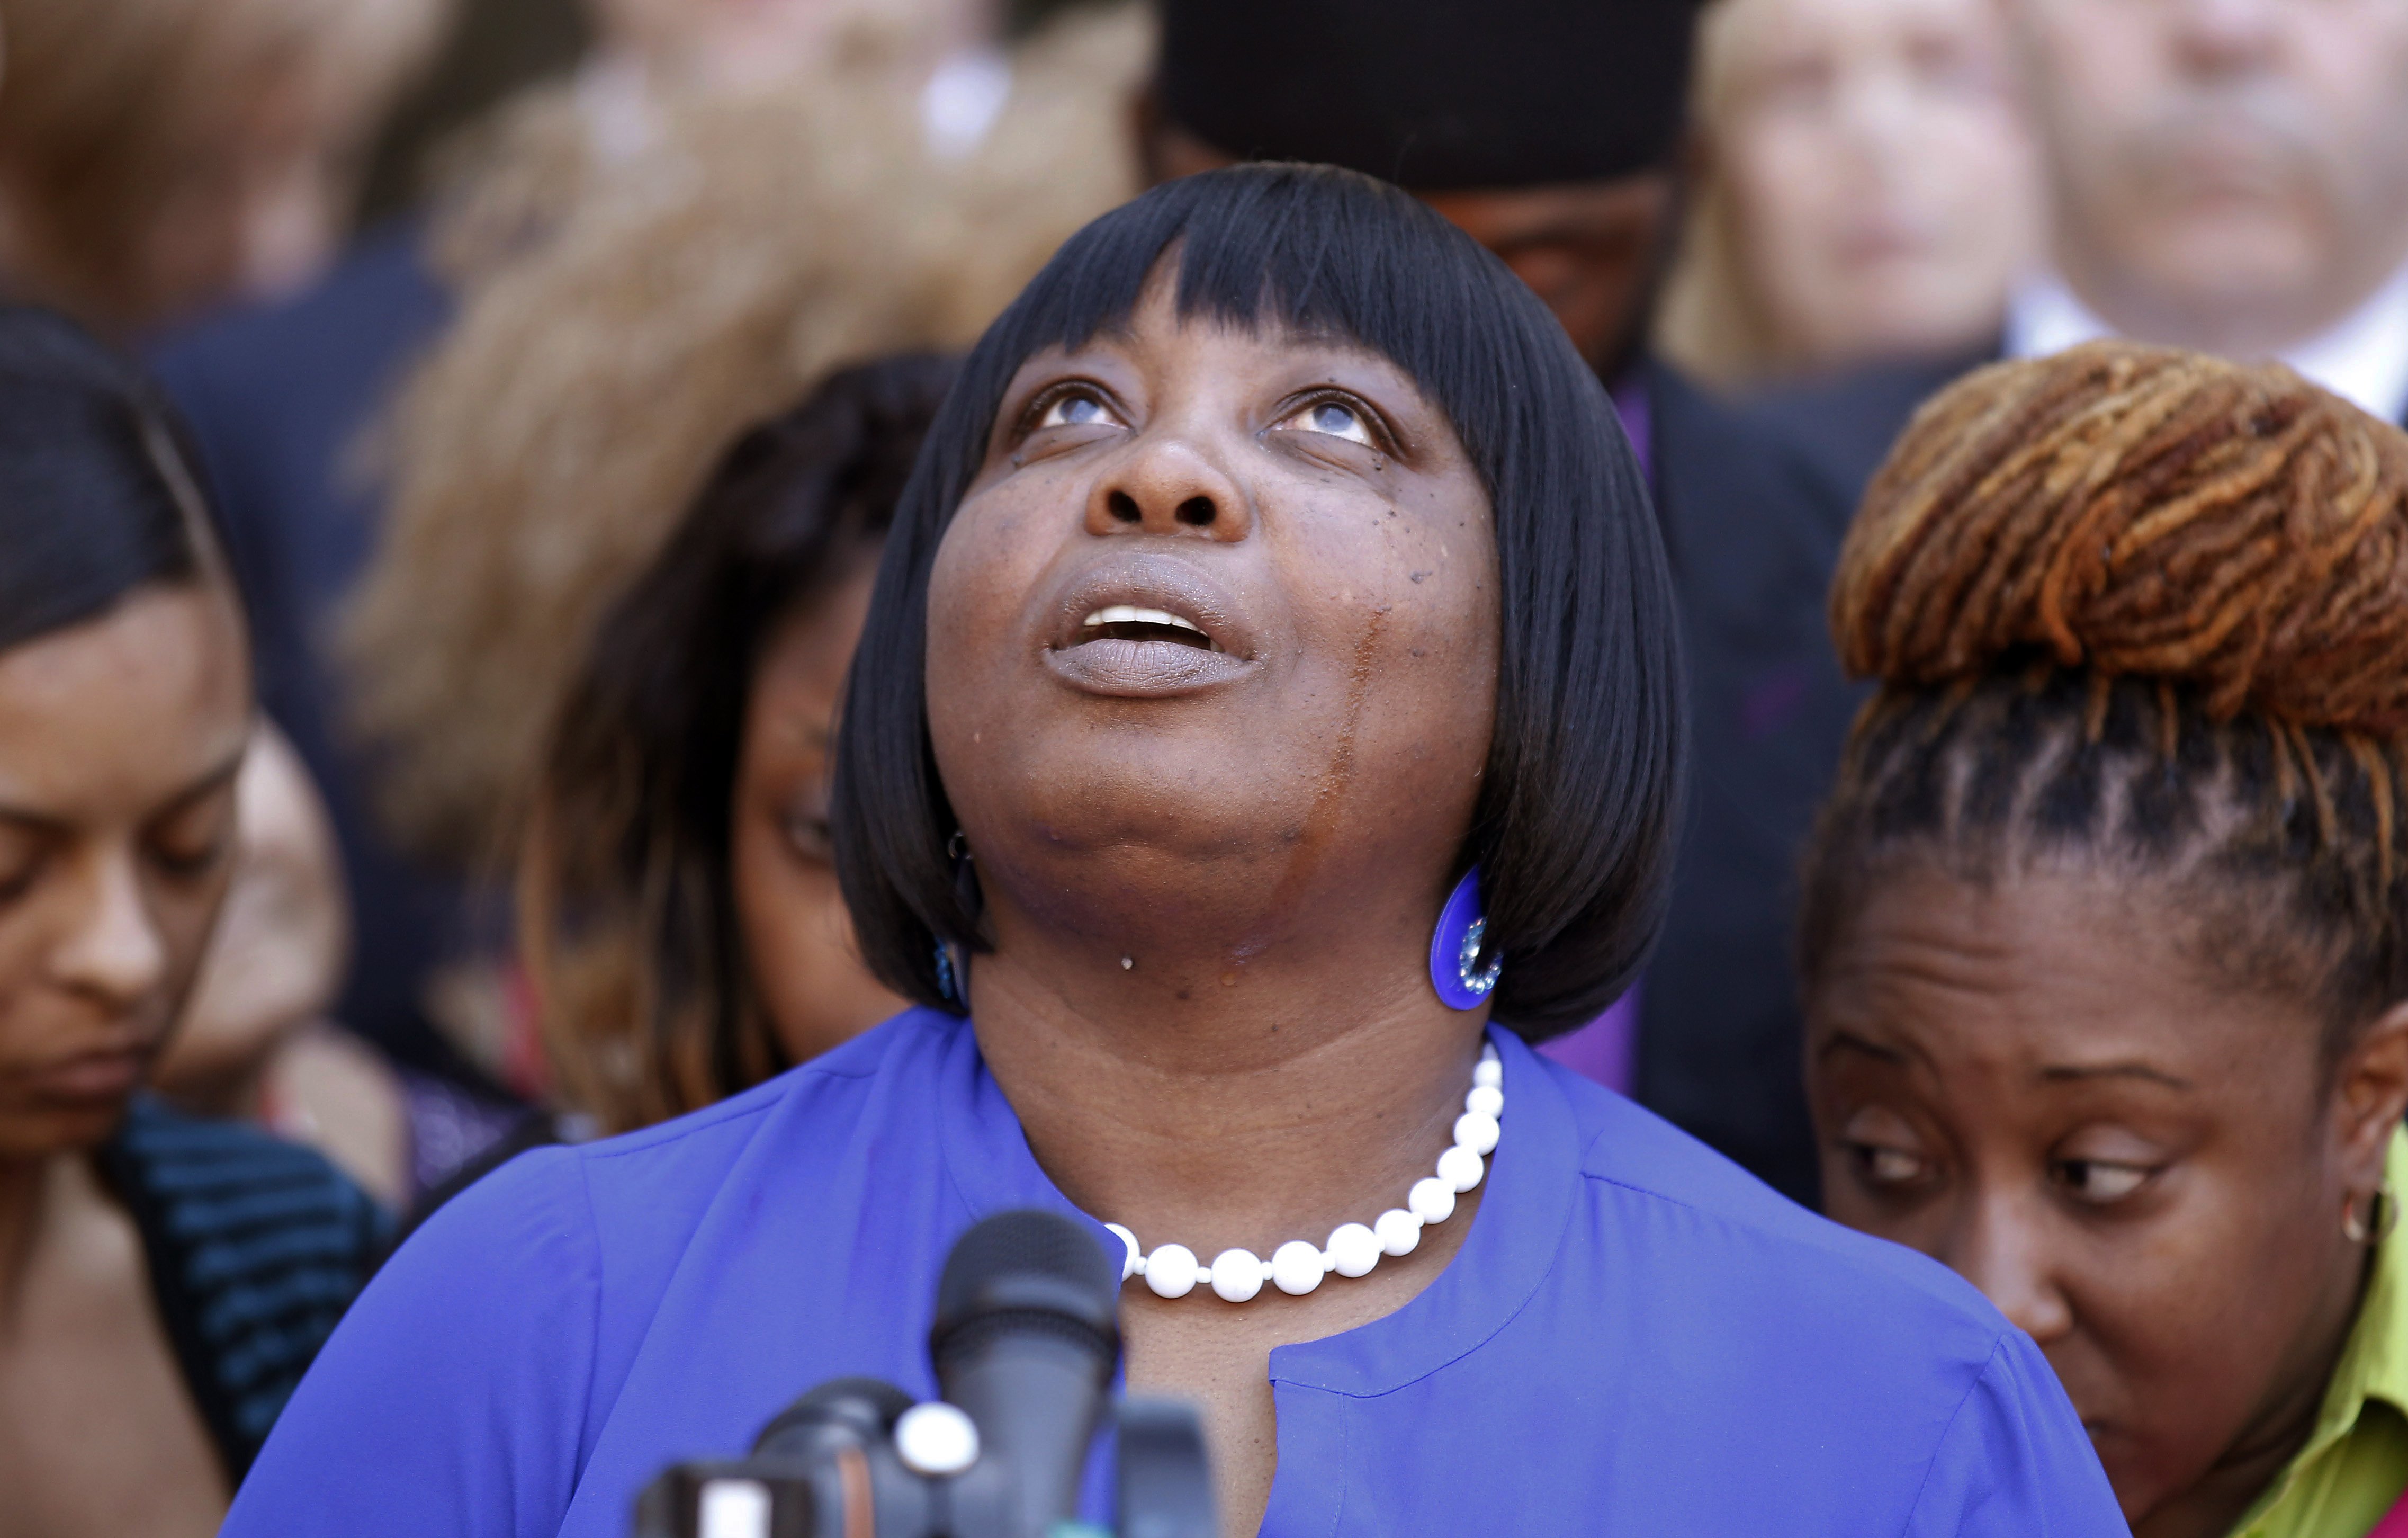 Ursula Ward, mother of shooting victim Odin Lloyd, looks up to the heavens as she talks about her deceased son outside Bristol County Superior Court on April 15, 2015, in Fall River, Mass., after former New England Patriots football player Aaron Hernandez was found guilty of murder in the shooting death of Odin Lloyd.